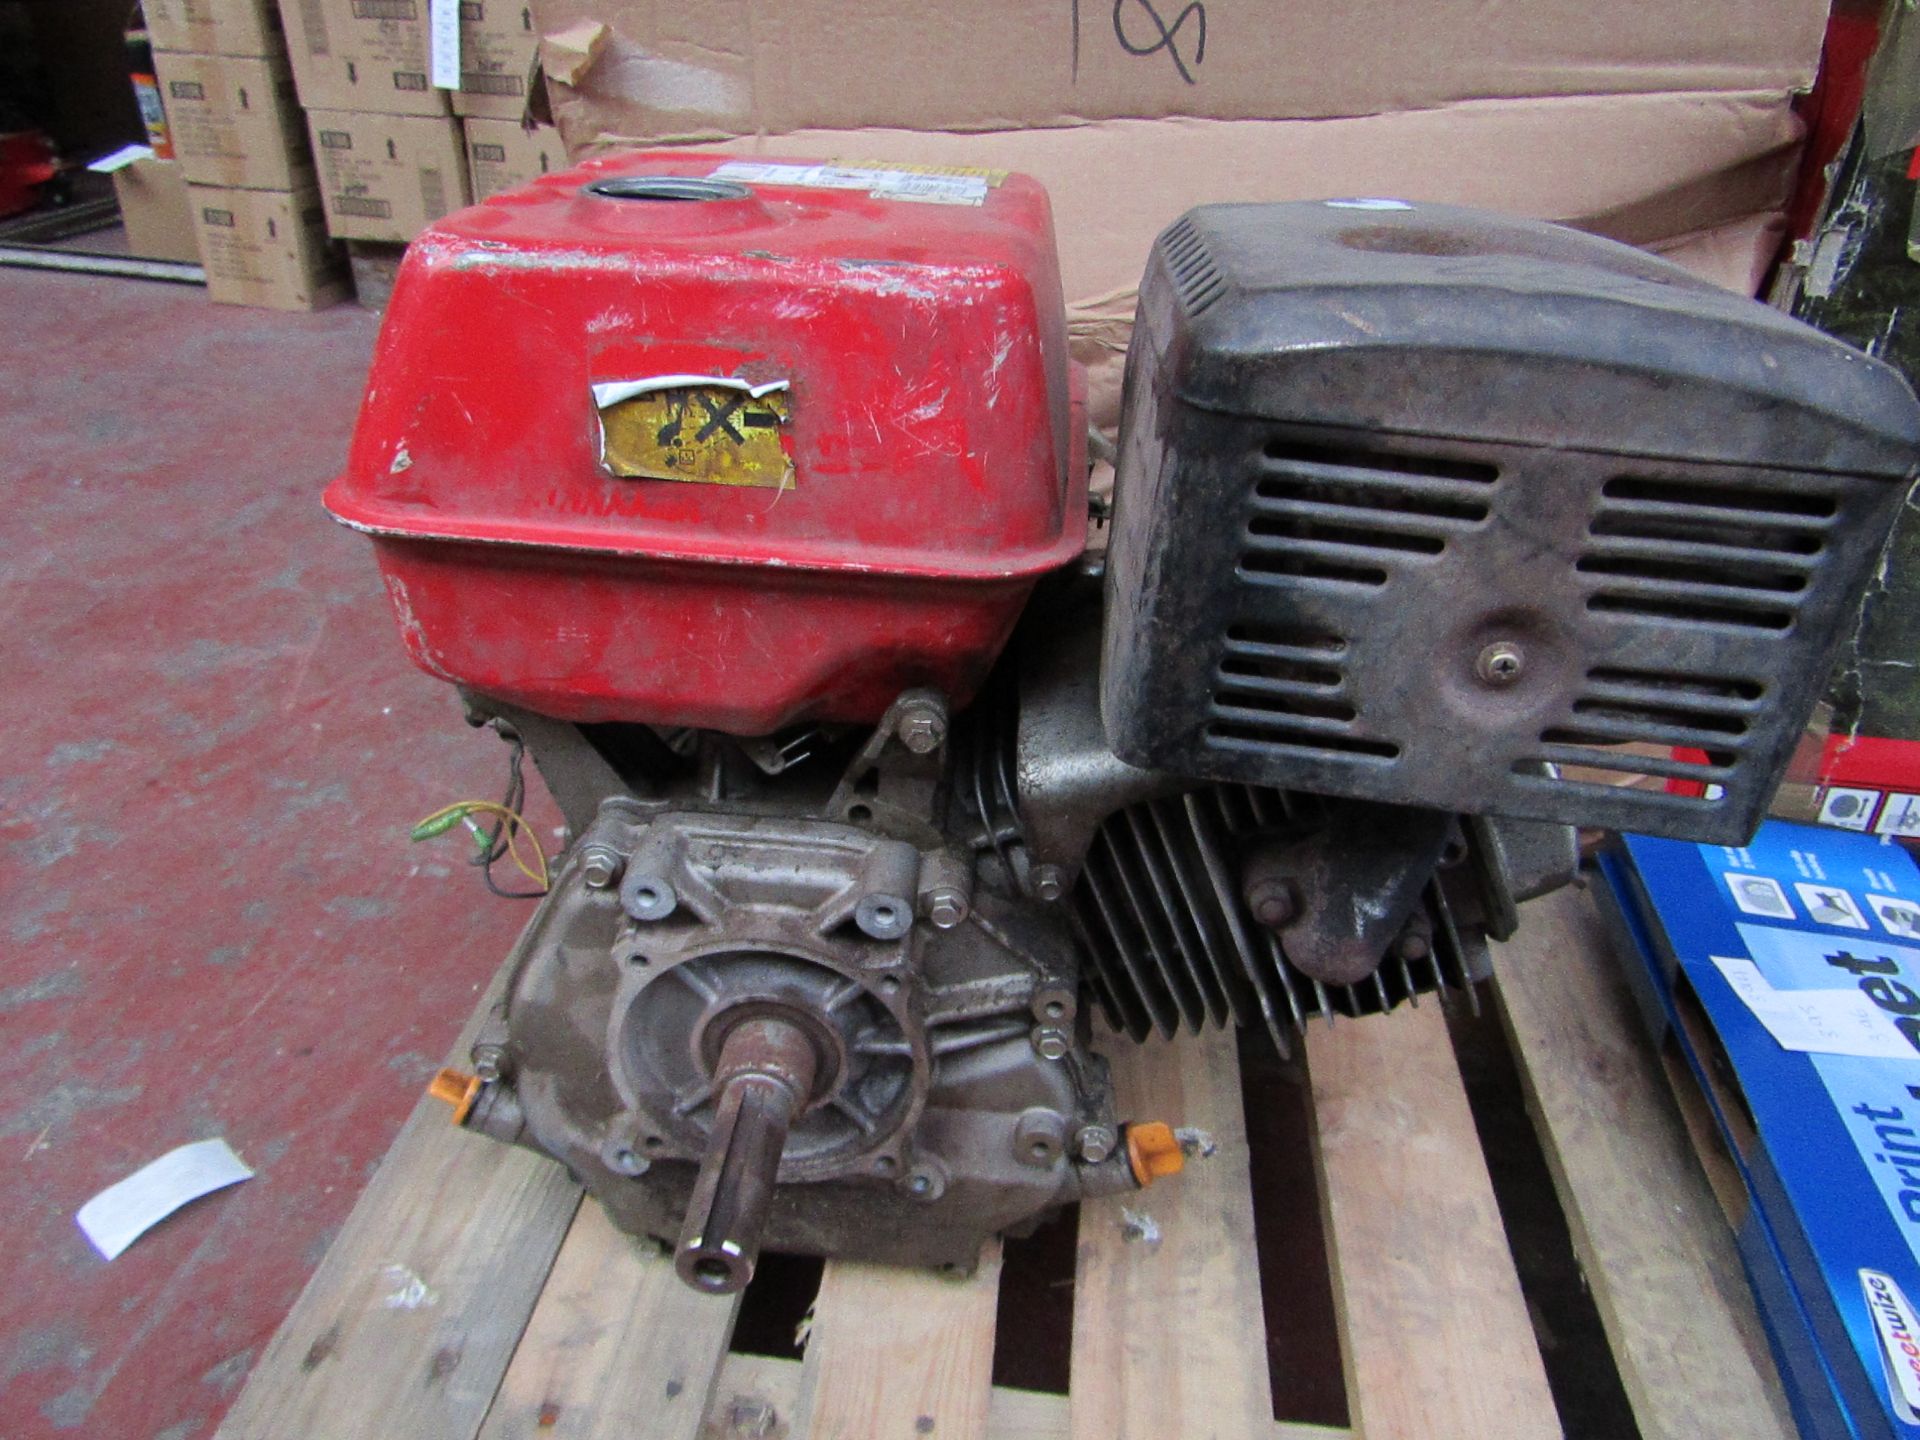 1x PLS260 ENGINE 8772, This lot is a Machine Mart product which is raw and Compressorletely